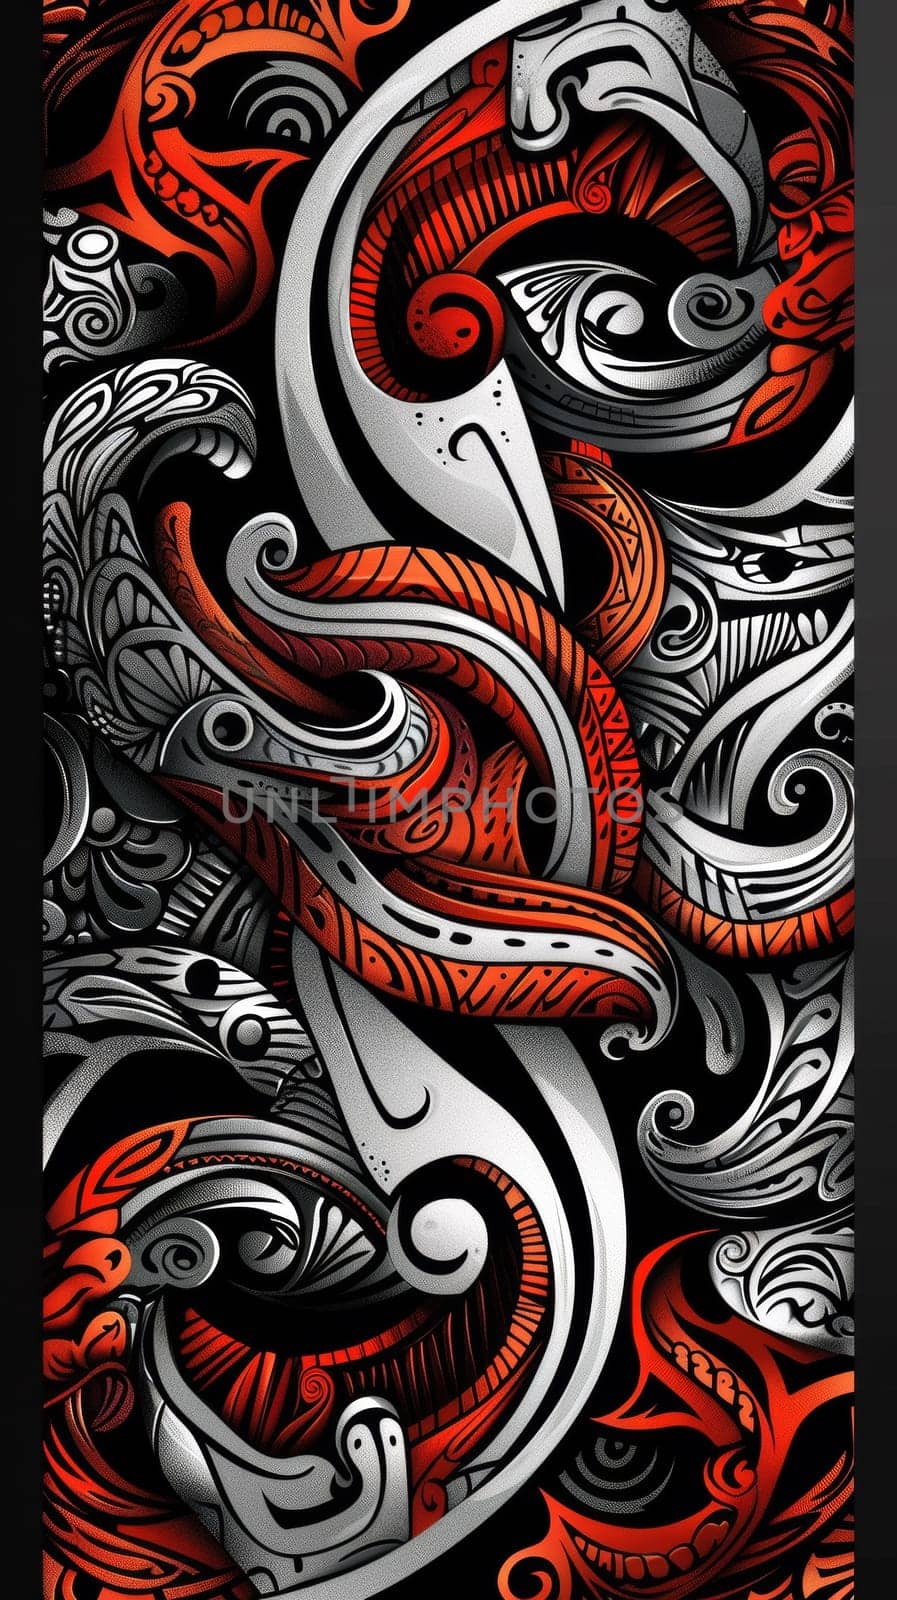 A large painting of a stylized design with red and white swirls